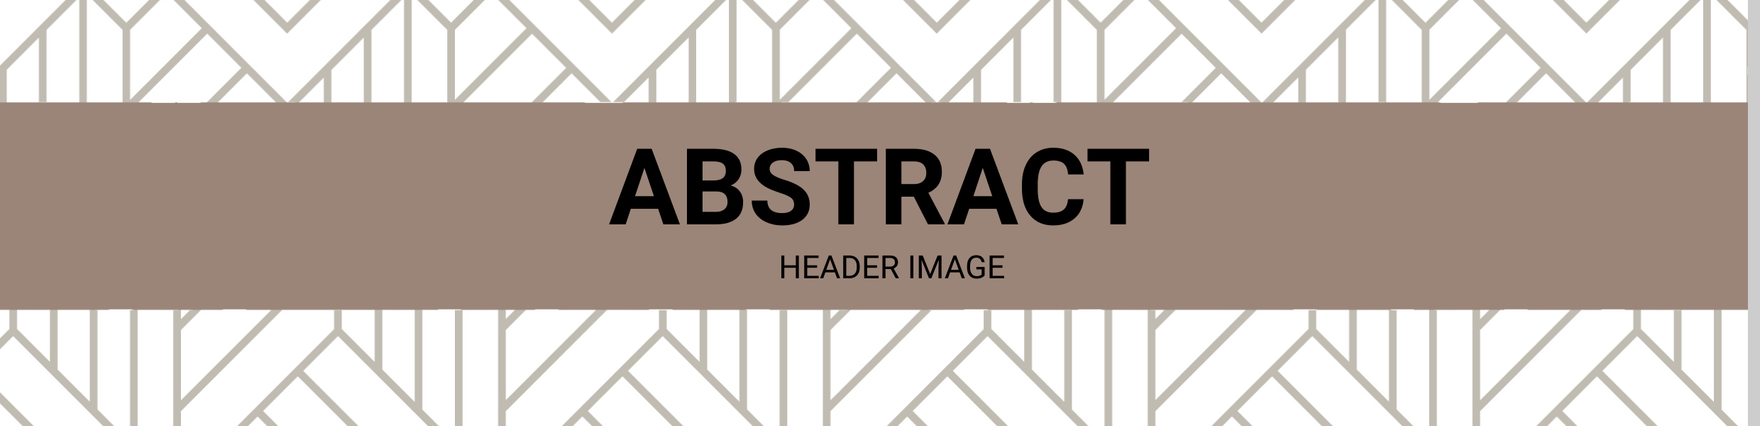 Free Abstract Header Image Template